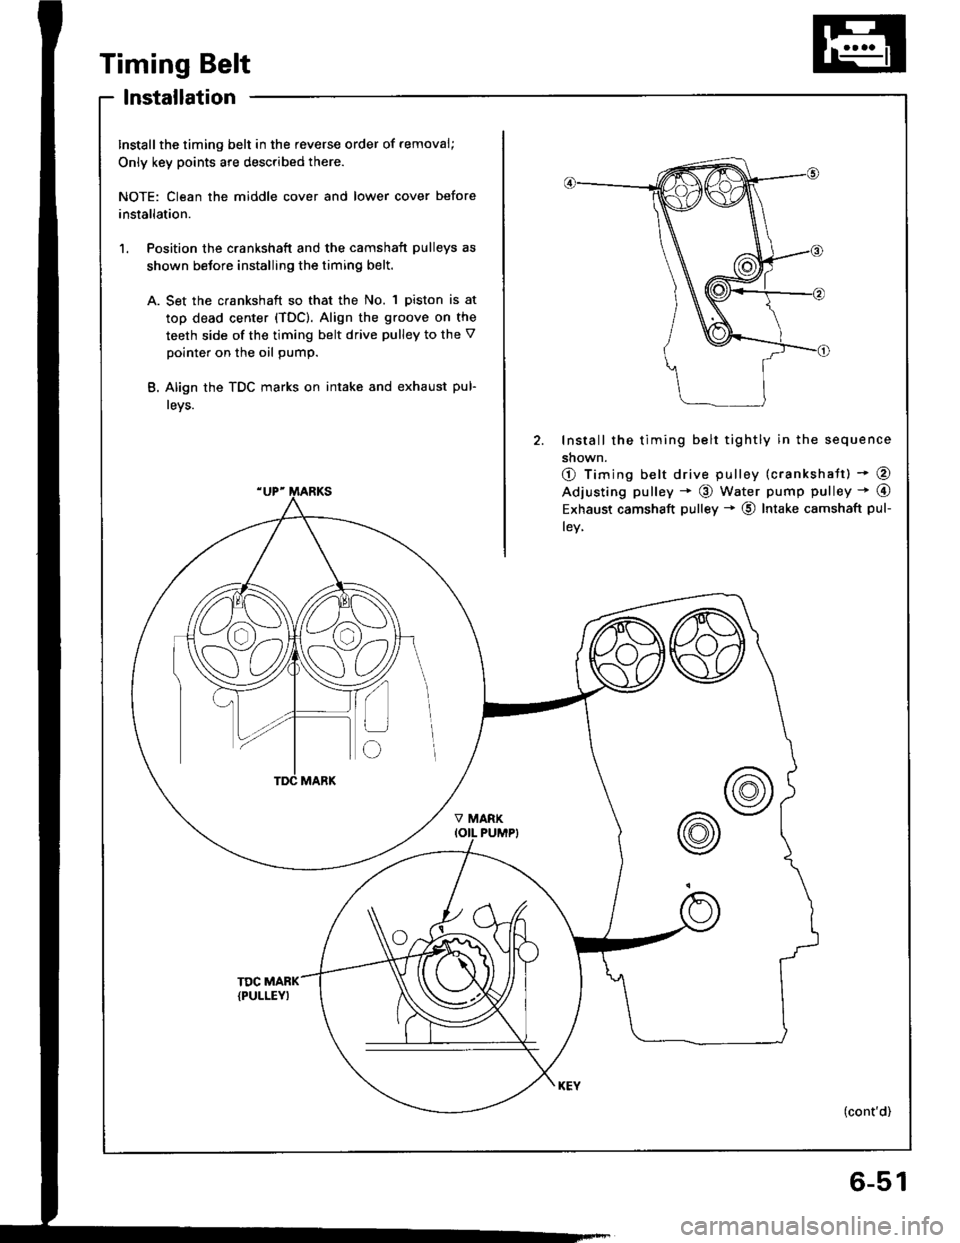 HONDA INTEGRA 1994 4.G Workshop Manual Timing Belt
lnstallation
Install the timing belt in the feverse order of removal;
Only key points are described there.
NOTE: Clean the middle cover and lower cover before
installation.
1. Position the